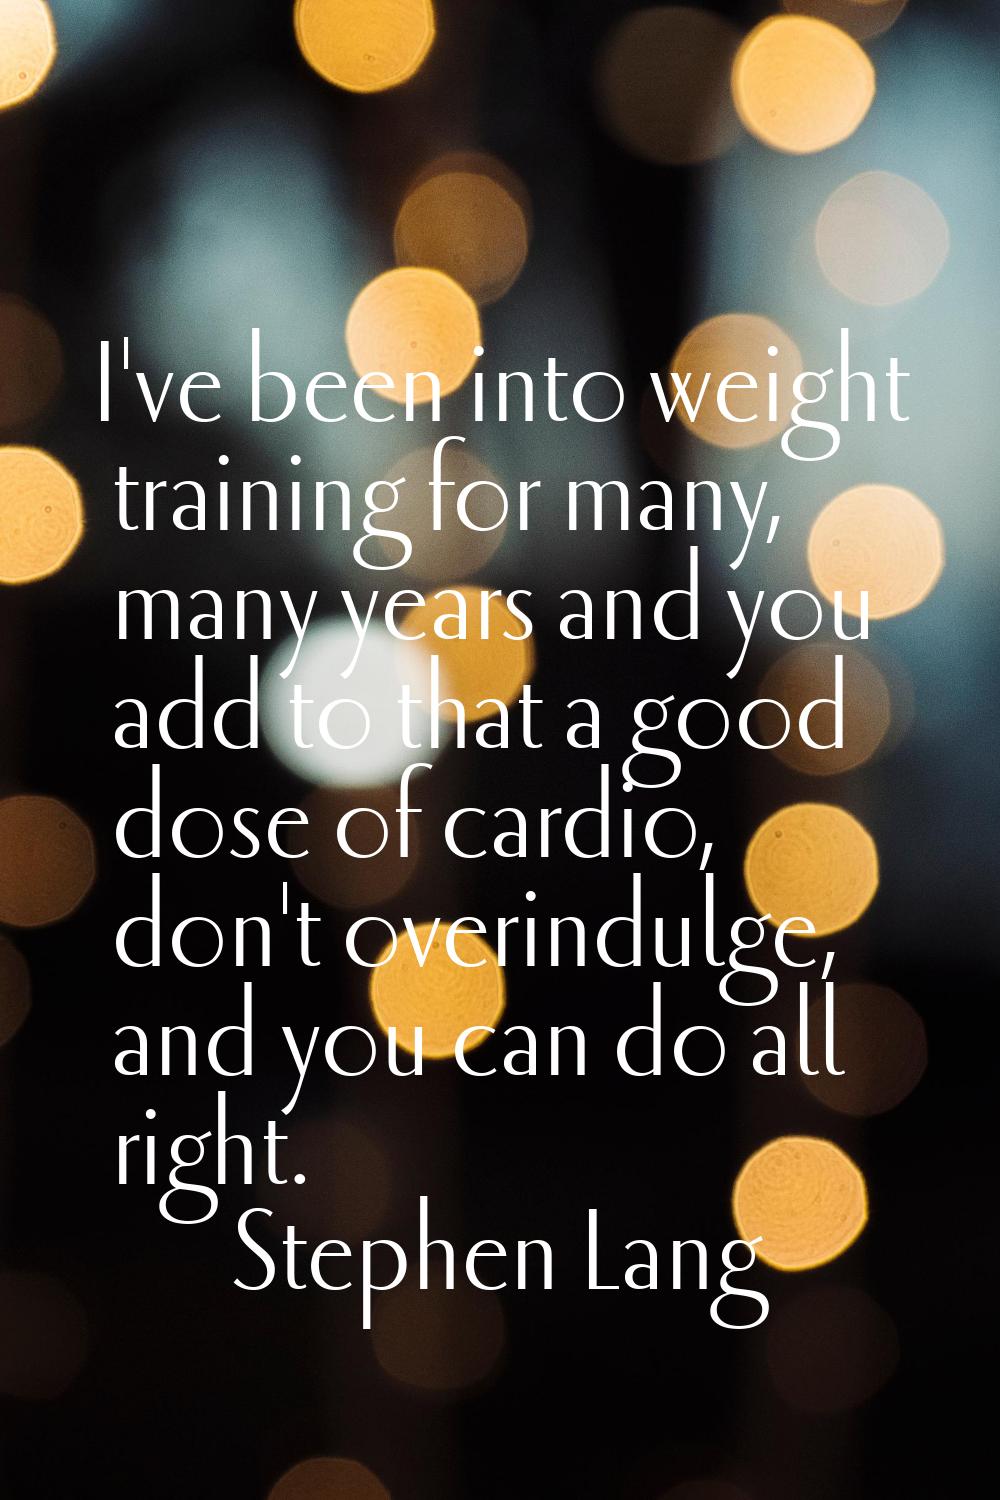 I've been into weight training for many, many years and you add to that a good dose of cardio, don'